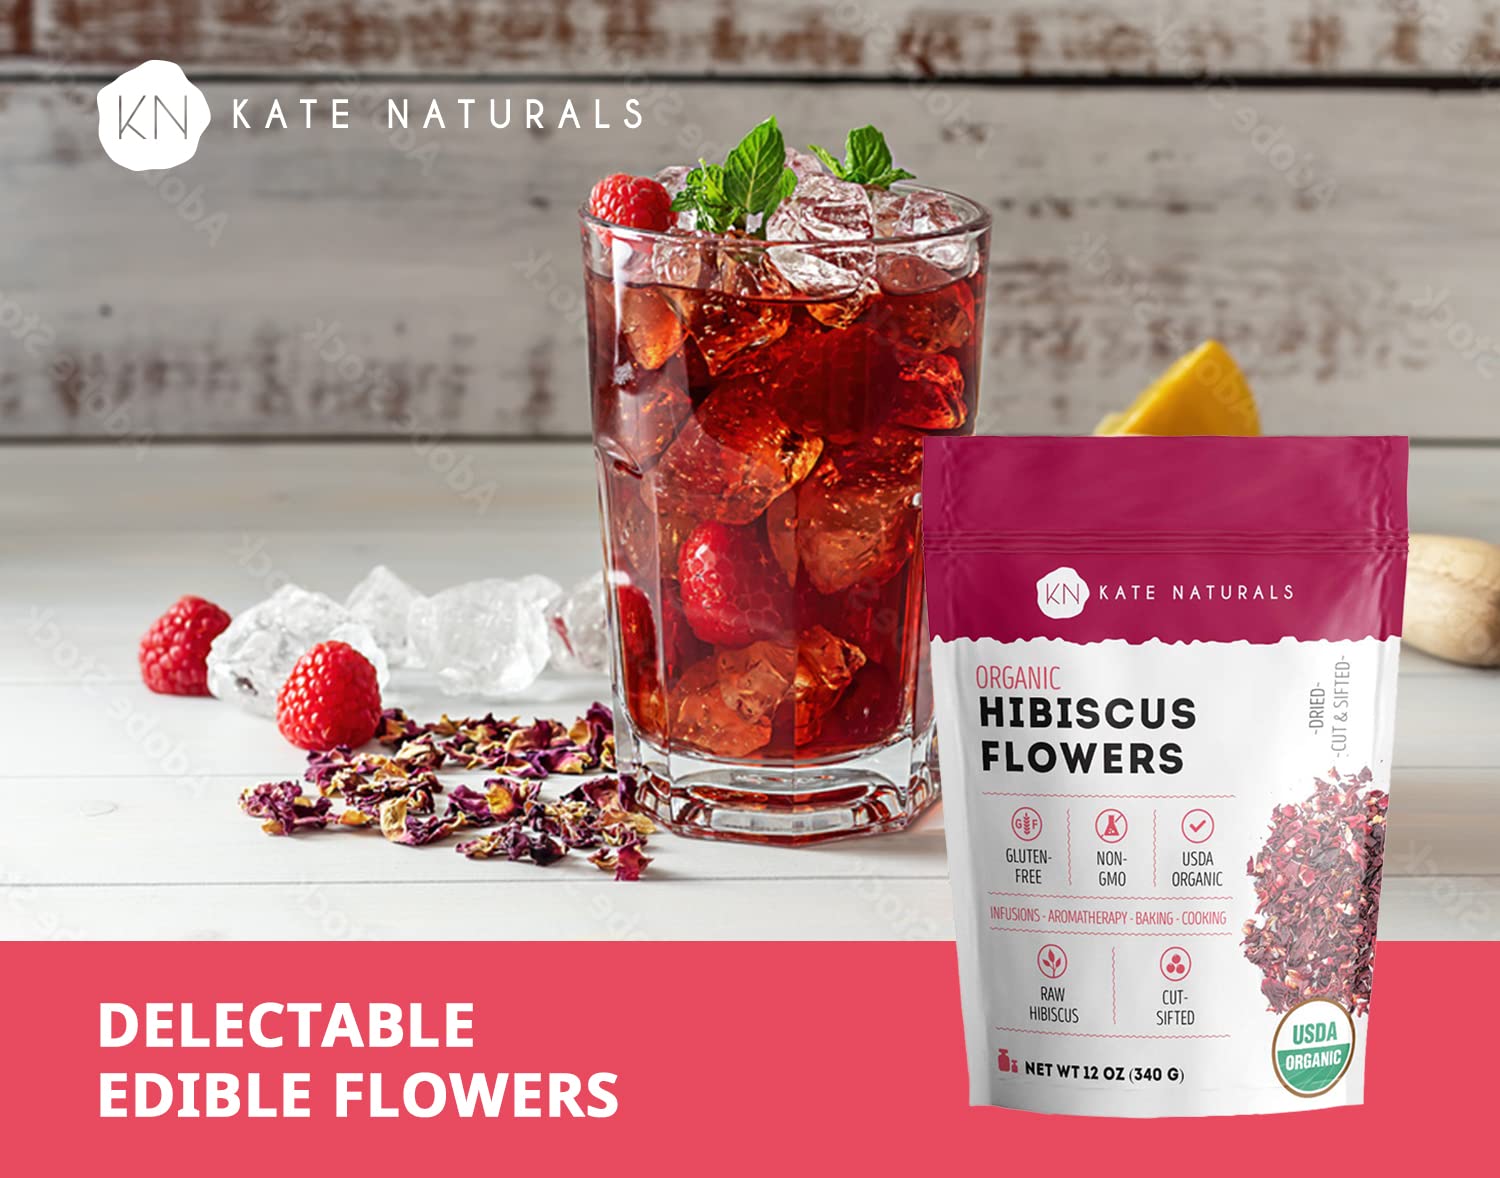  Herbs Botanica Hibiscus Flower Dried Organic For Tea, Hair  Growth, Flor De Jamaica Organica Whole Full Flower Petals 100% Natural &  Dried Edible for Hibiscus Syrup, Cake Decoration & Cocktails